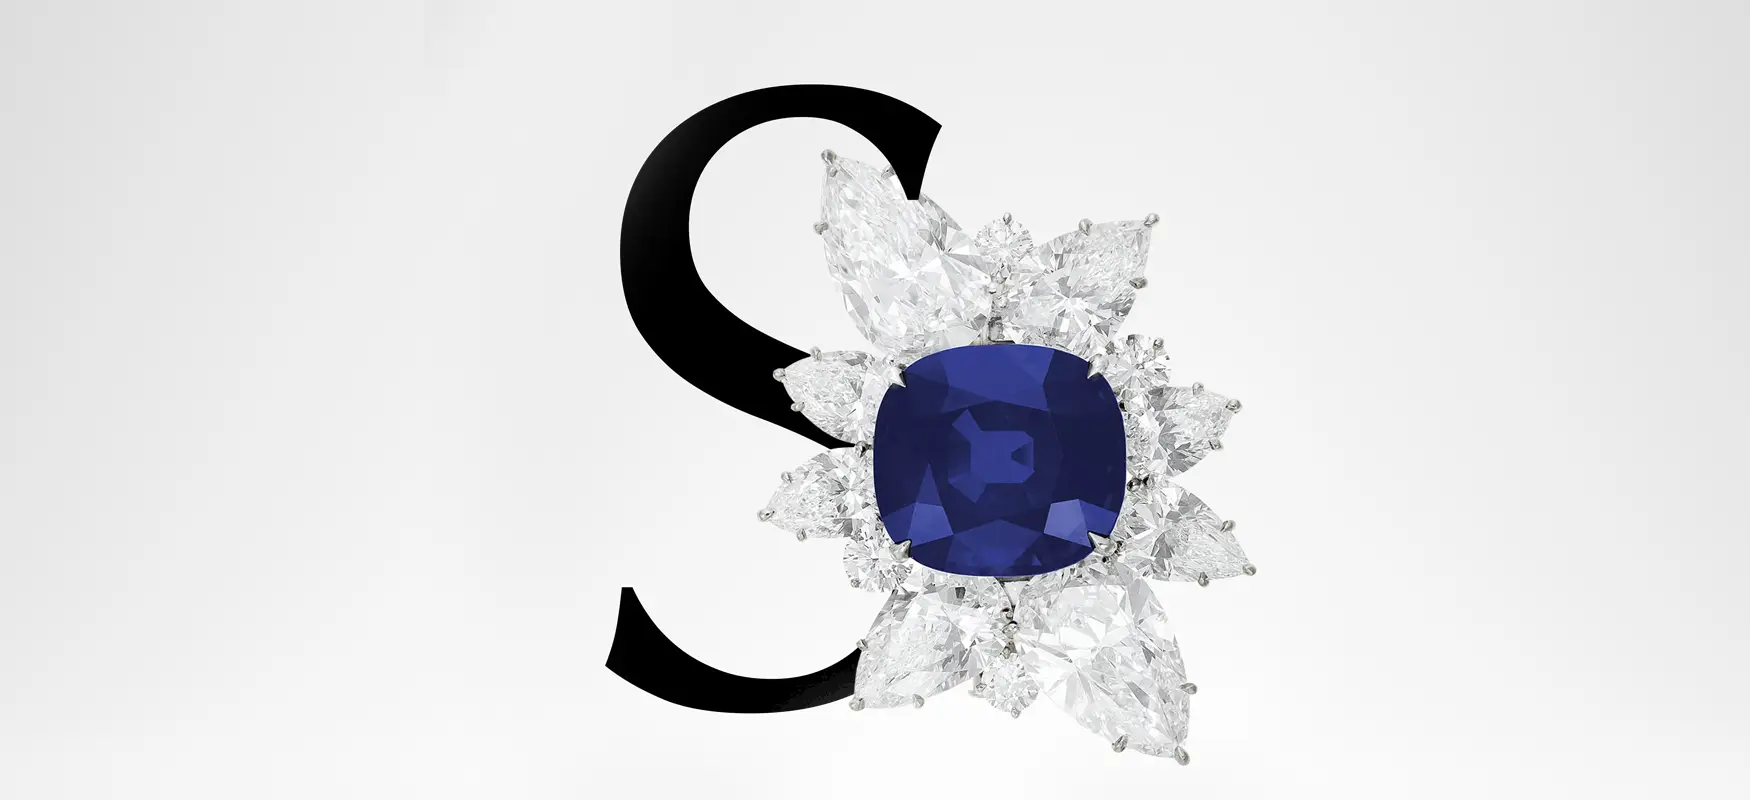 S for Sapphire